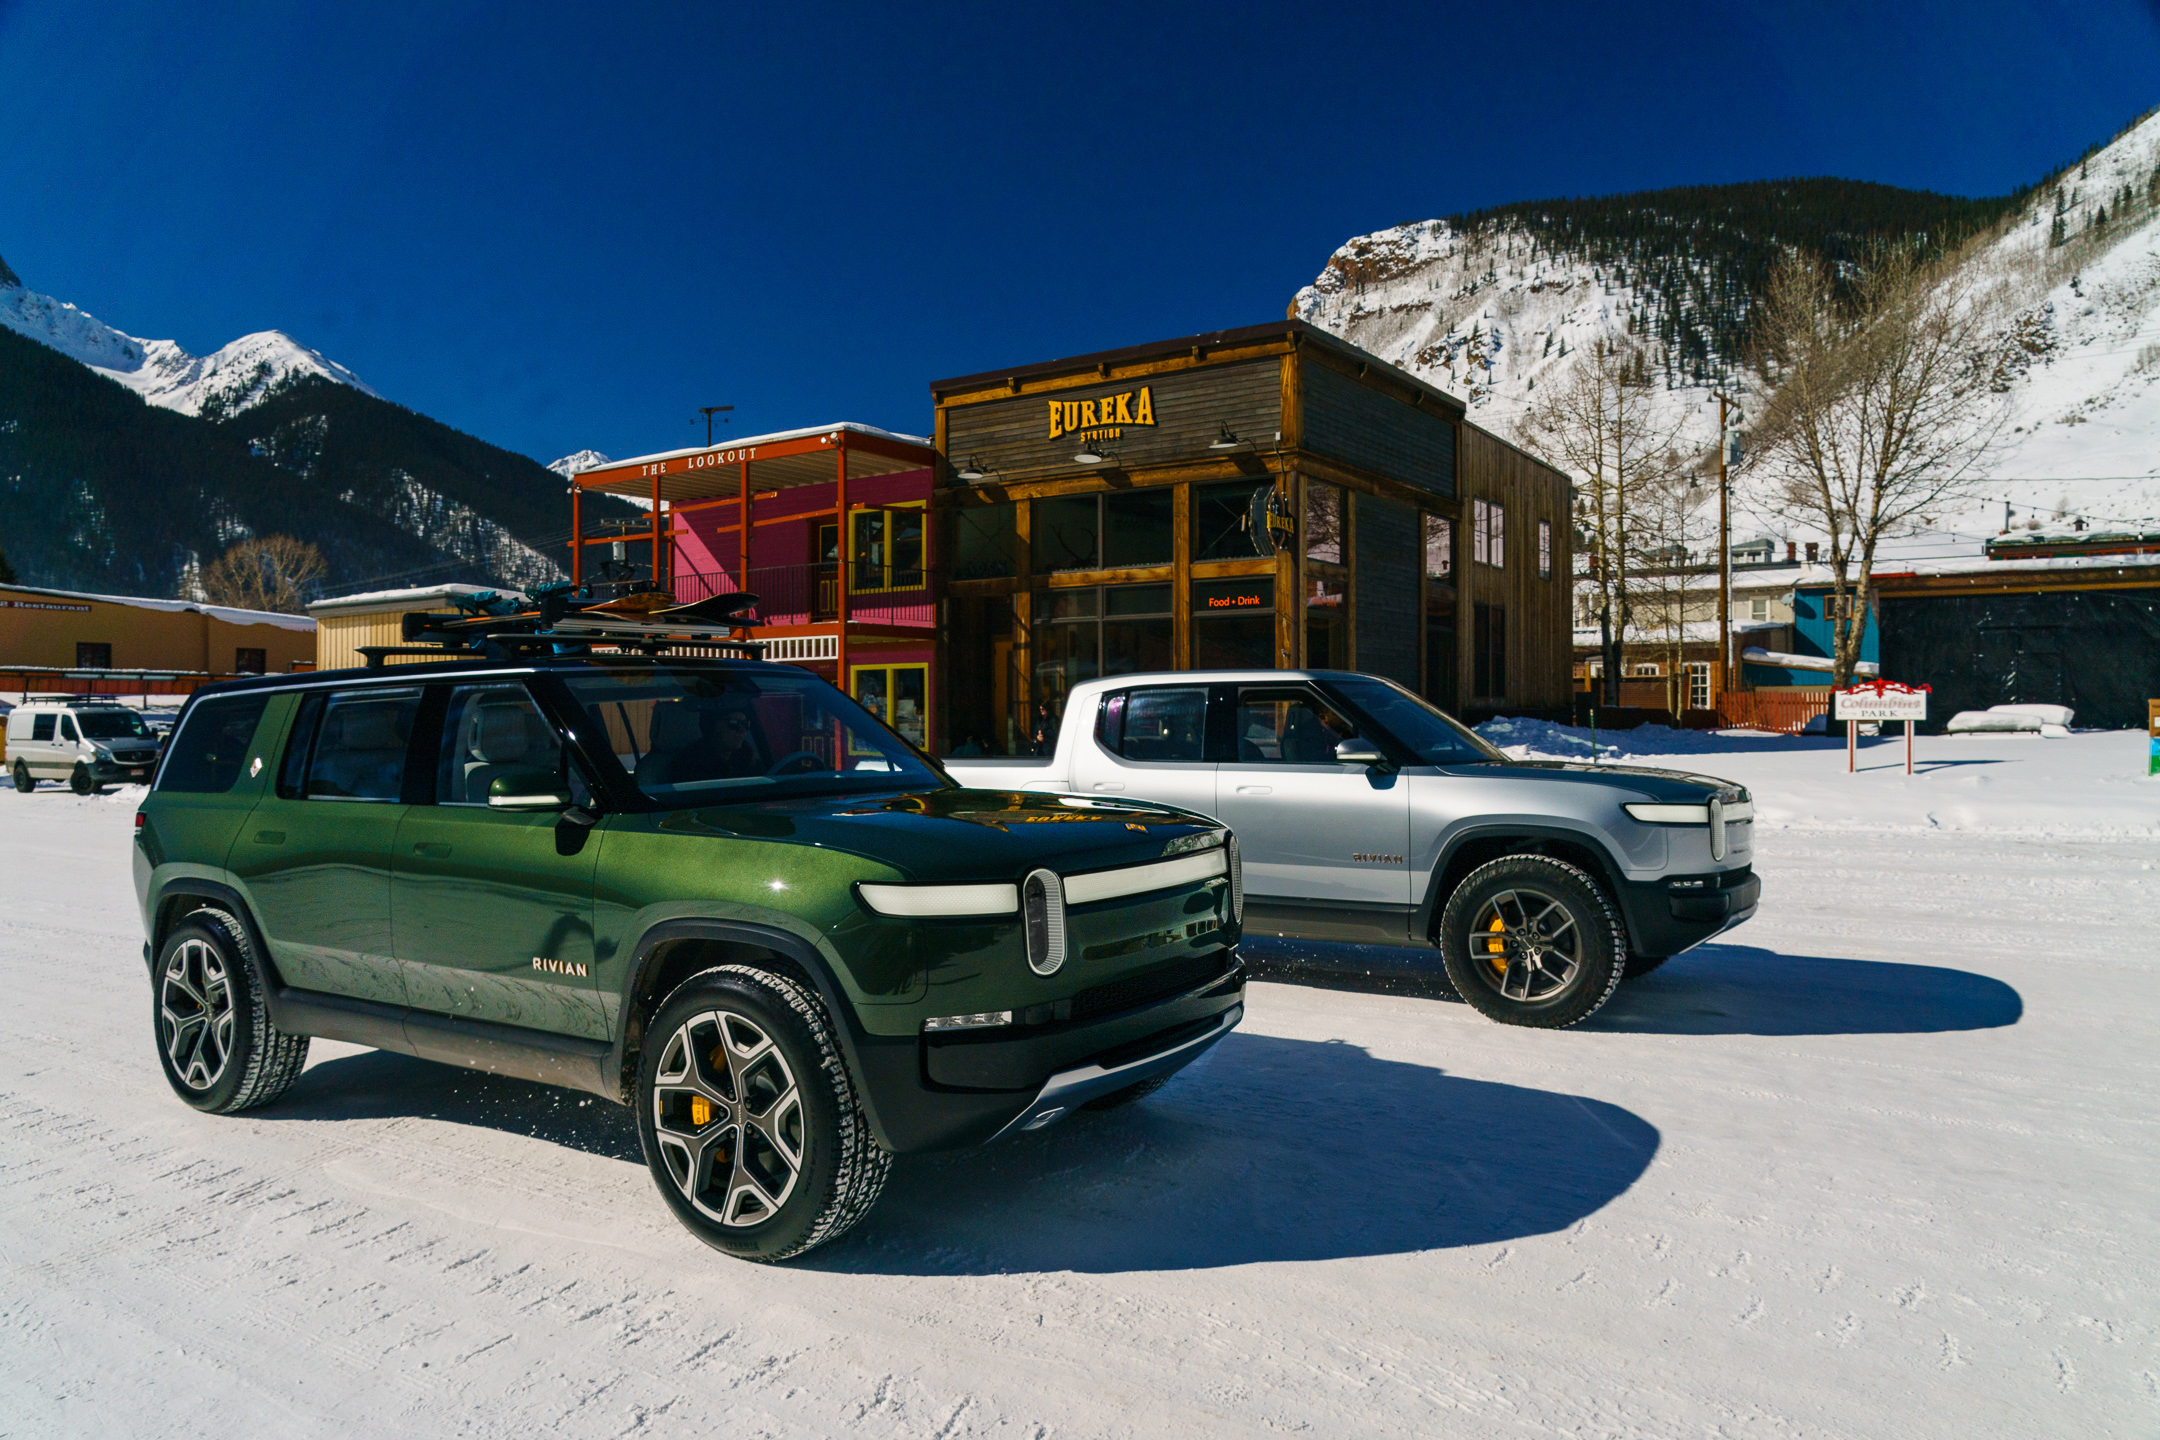 Rivian R1S (2020): 7-Seater Electric SUV